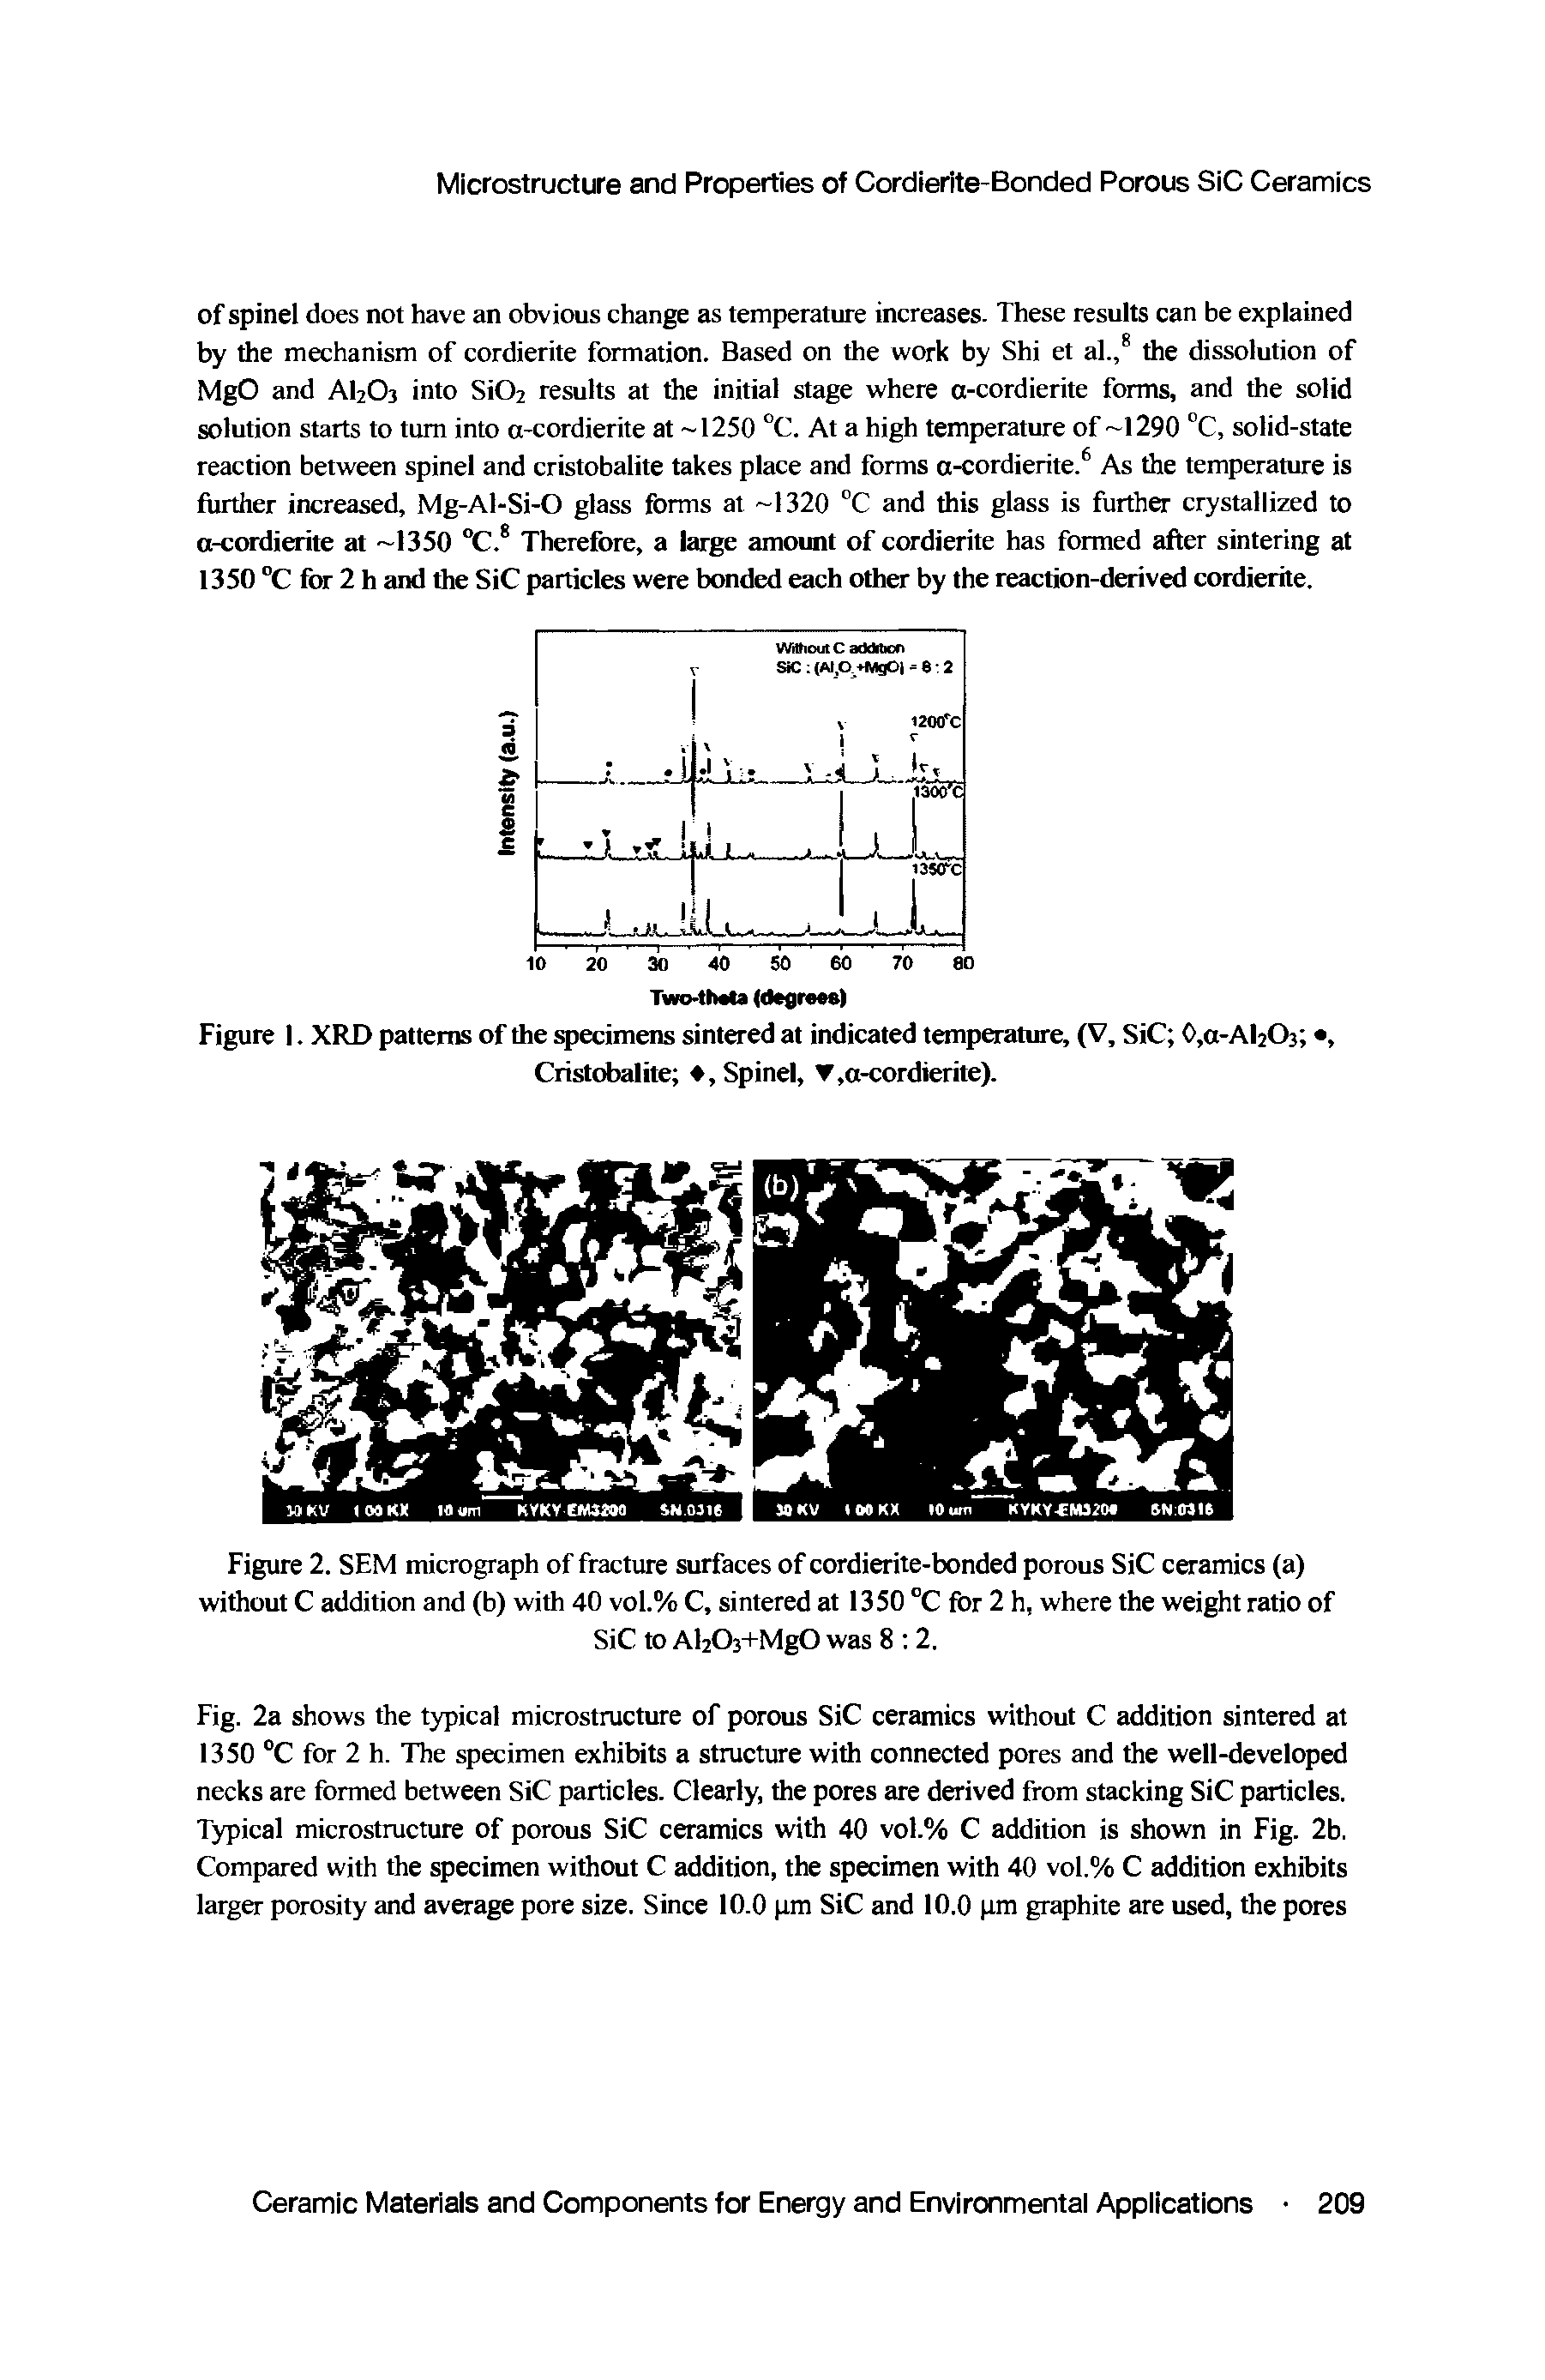 Figure 2. SEM micrograph of fracture surfaces of cordierite-bonded porous SiC ceramics (a) without C addition and (b) with 40 vol.% C, sintered at 1350 °C for 2 h, where the weight ratio of...